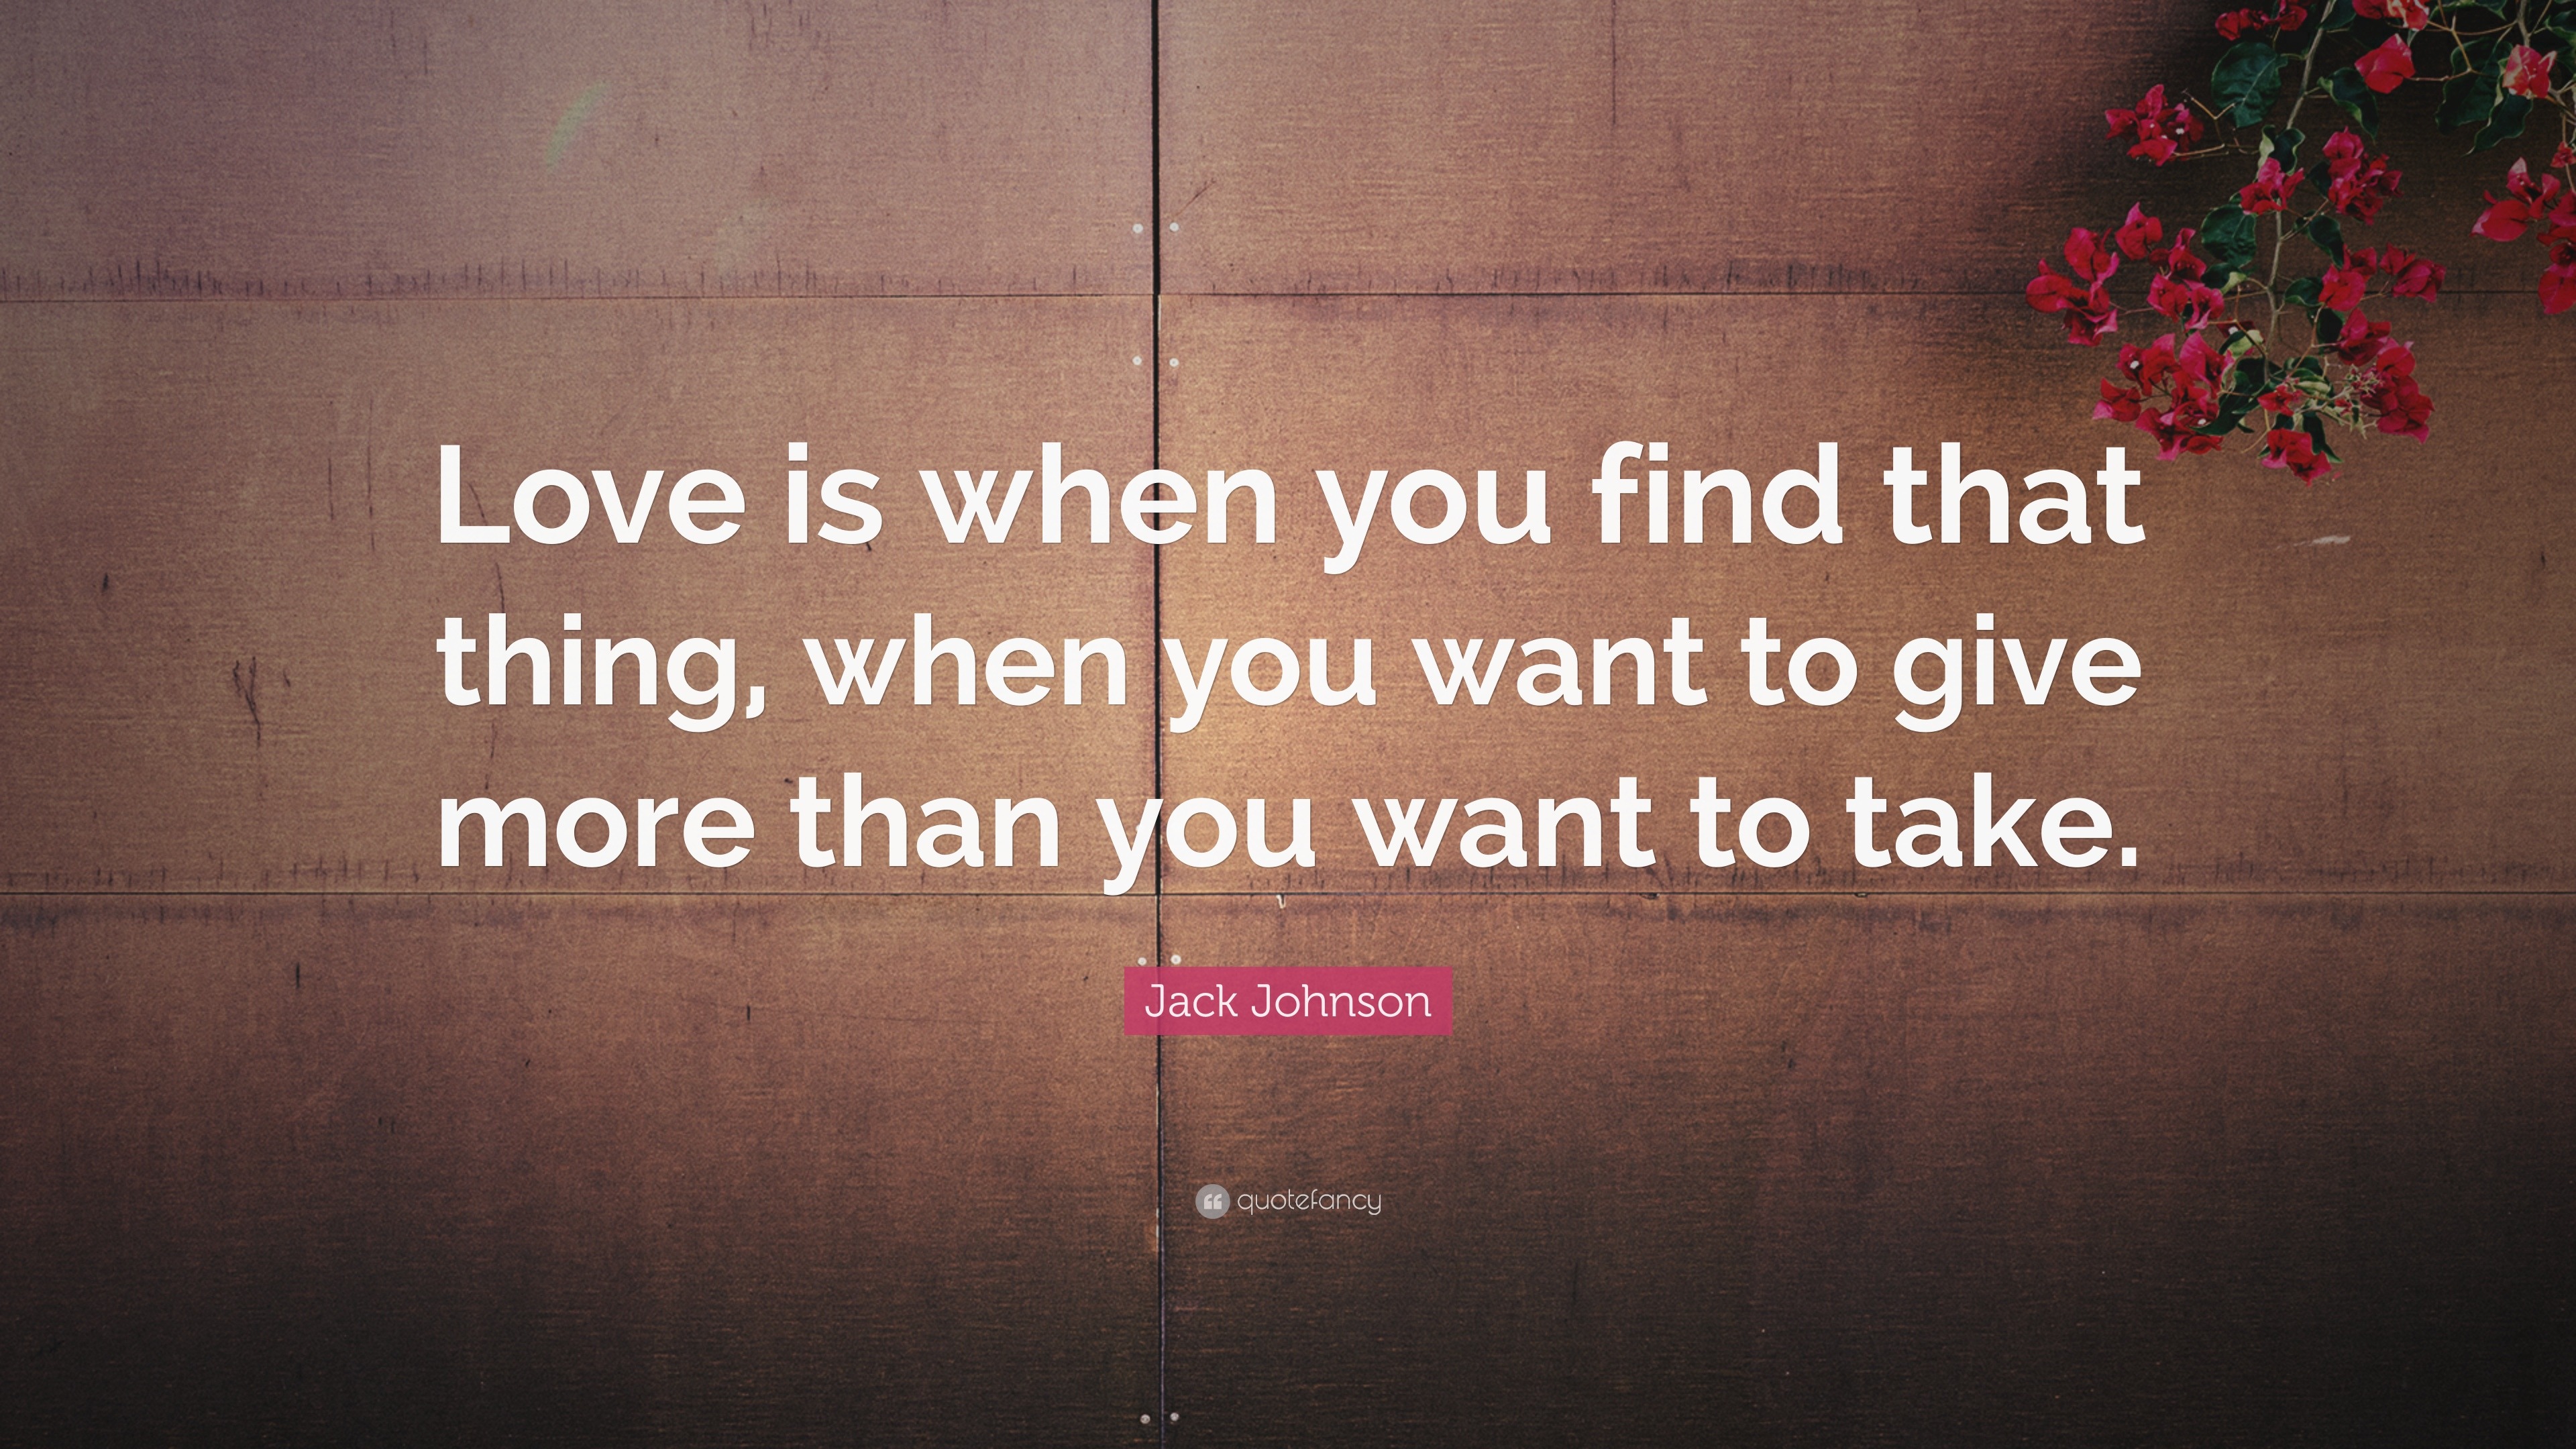 Jack Johnson Quote: “Love is when you find that thing, when you want to ...